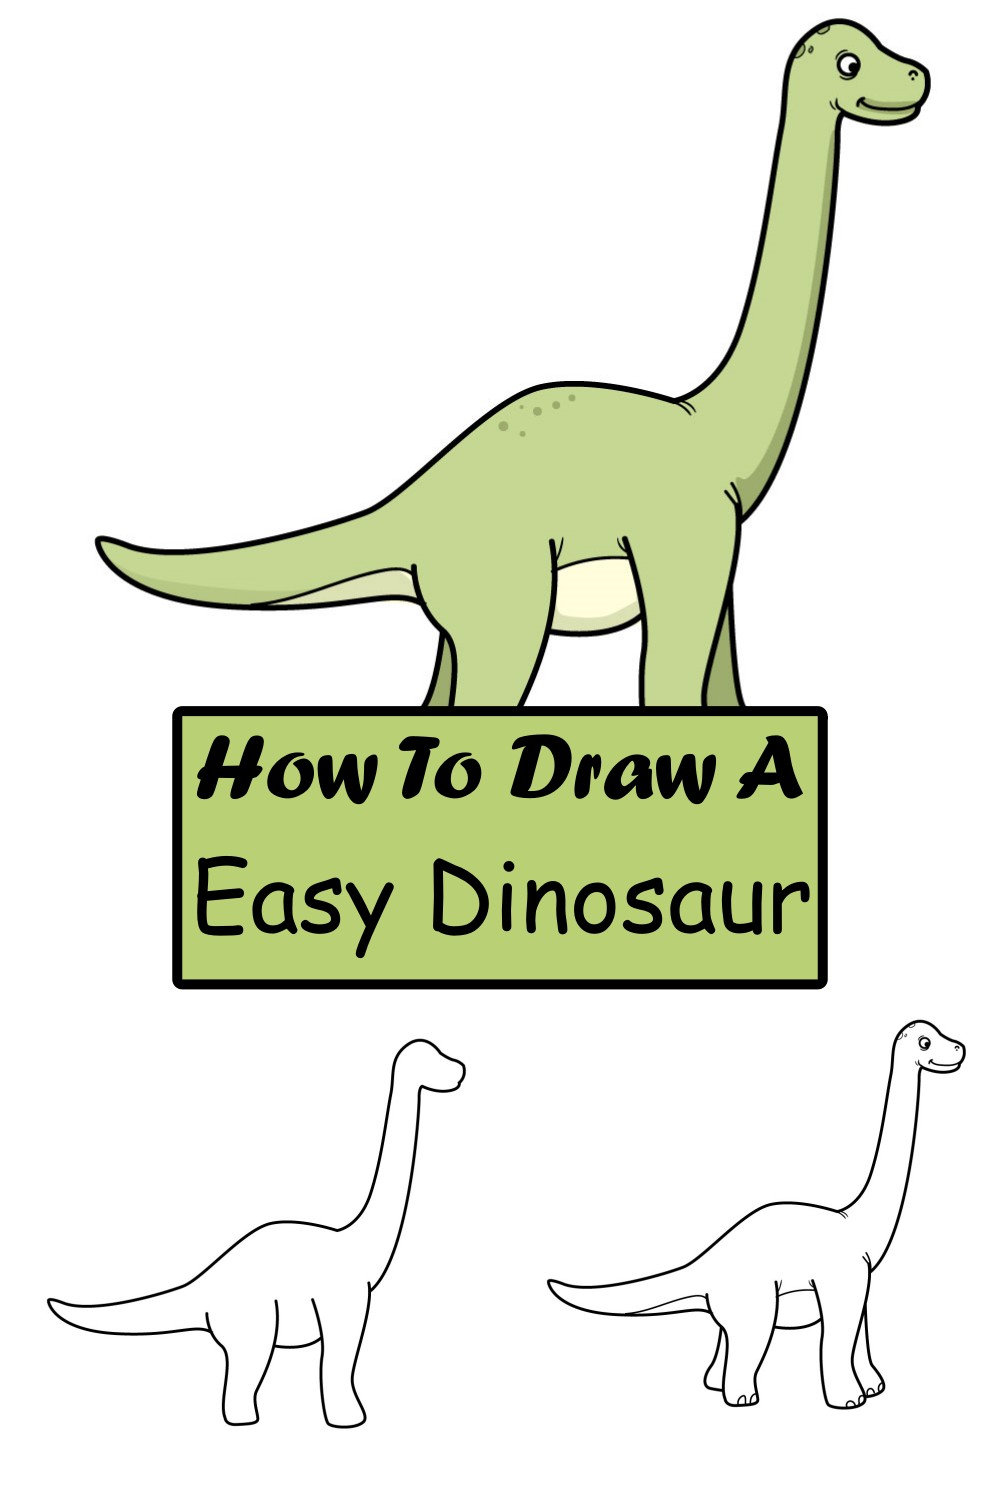 How To Draw A Easy Dinosaur